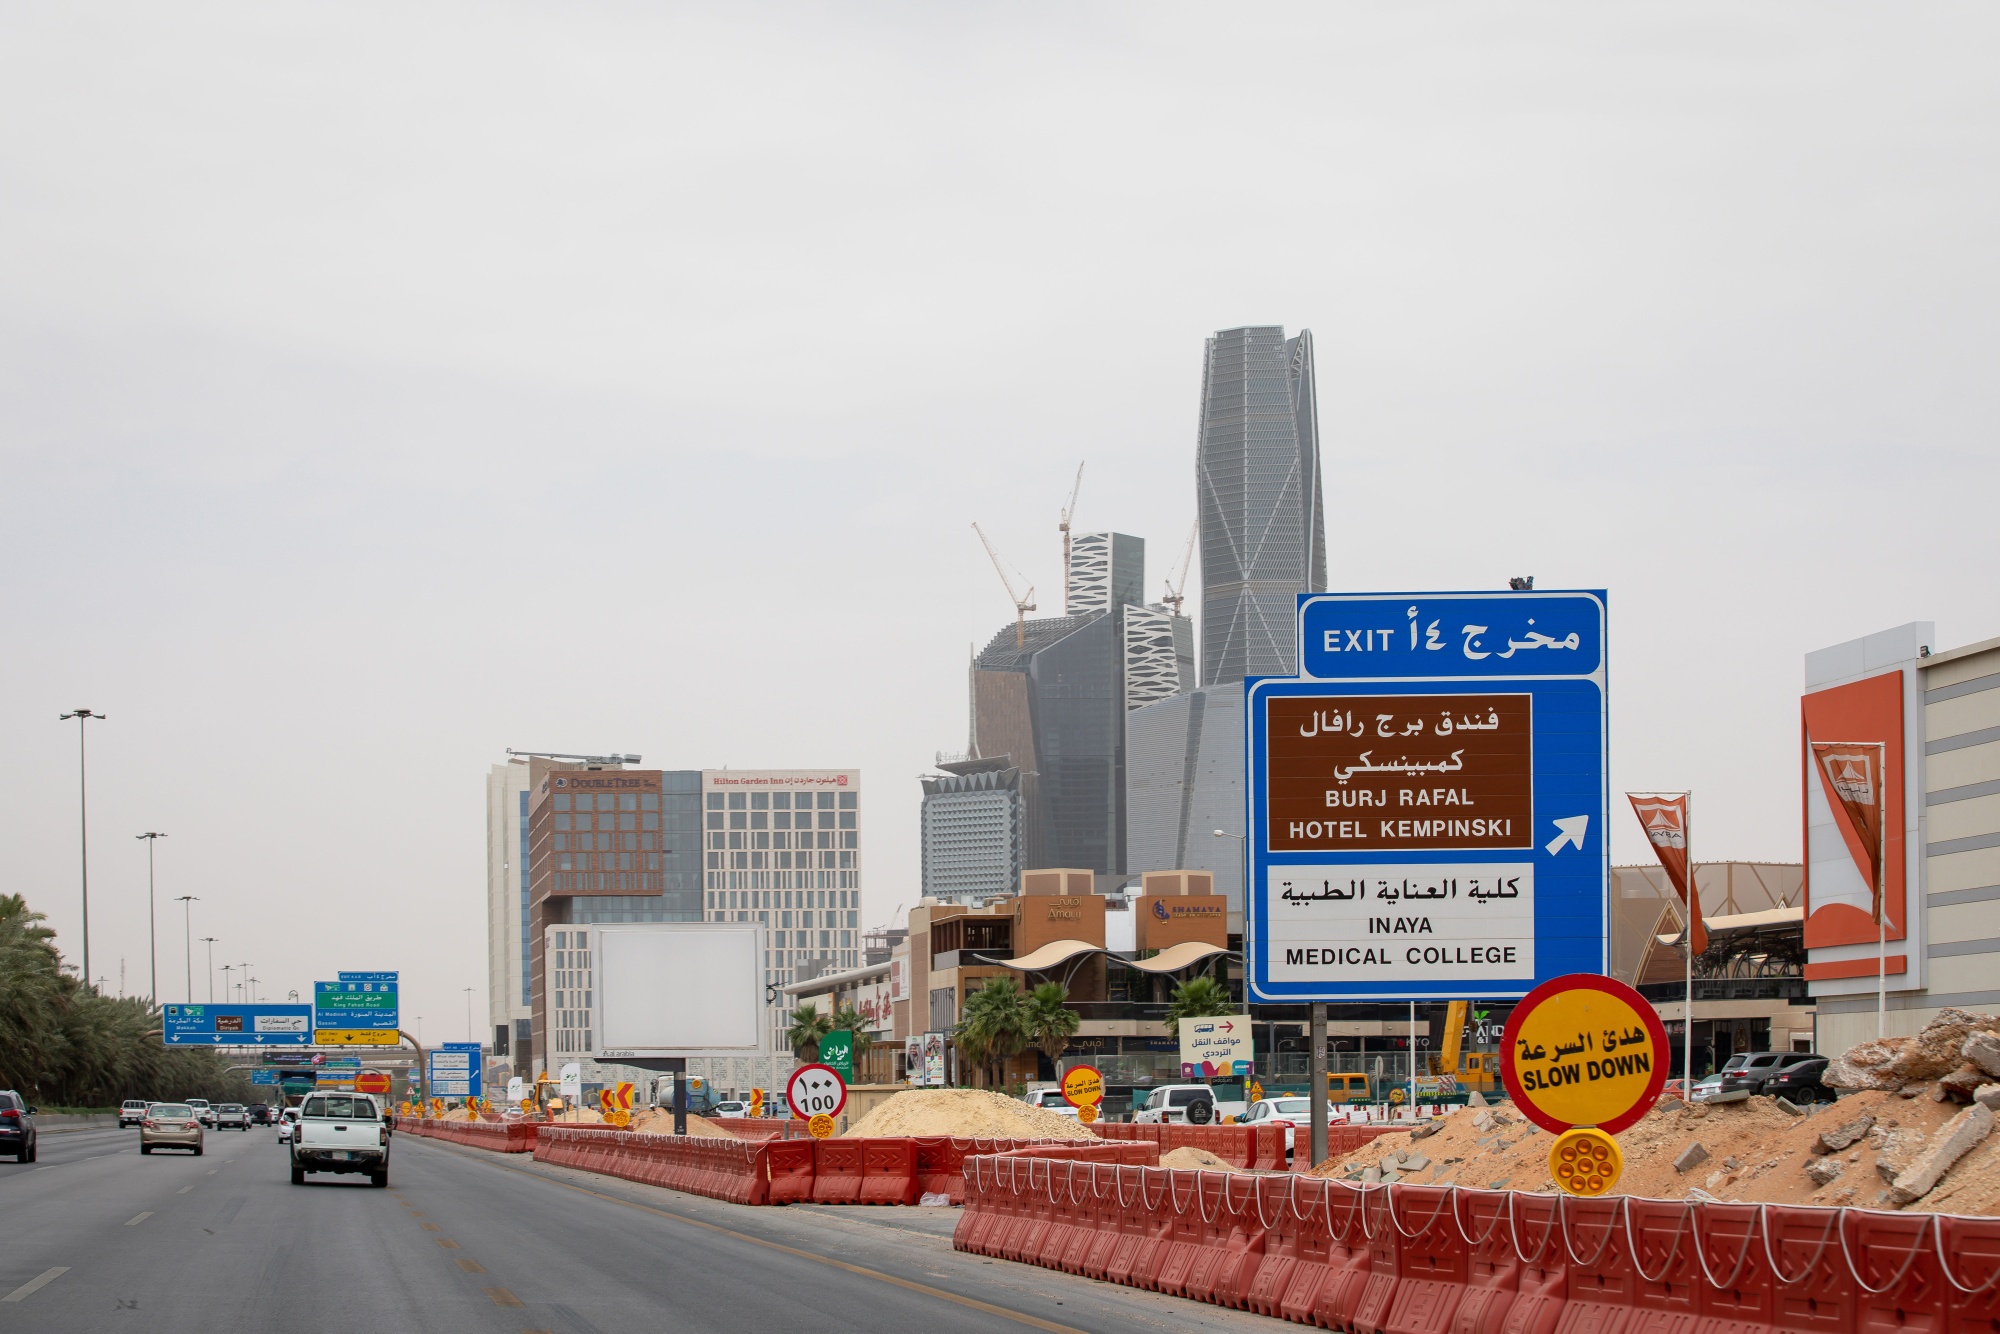 The&nbsp;construction site for a new highway and metro development in Riyadh, Saudi Arabia,&nbsp;May 19, 2020.&nbsp;